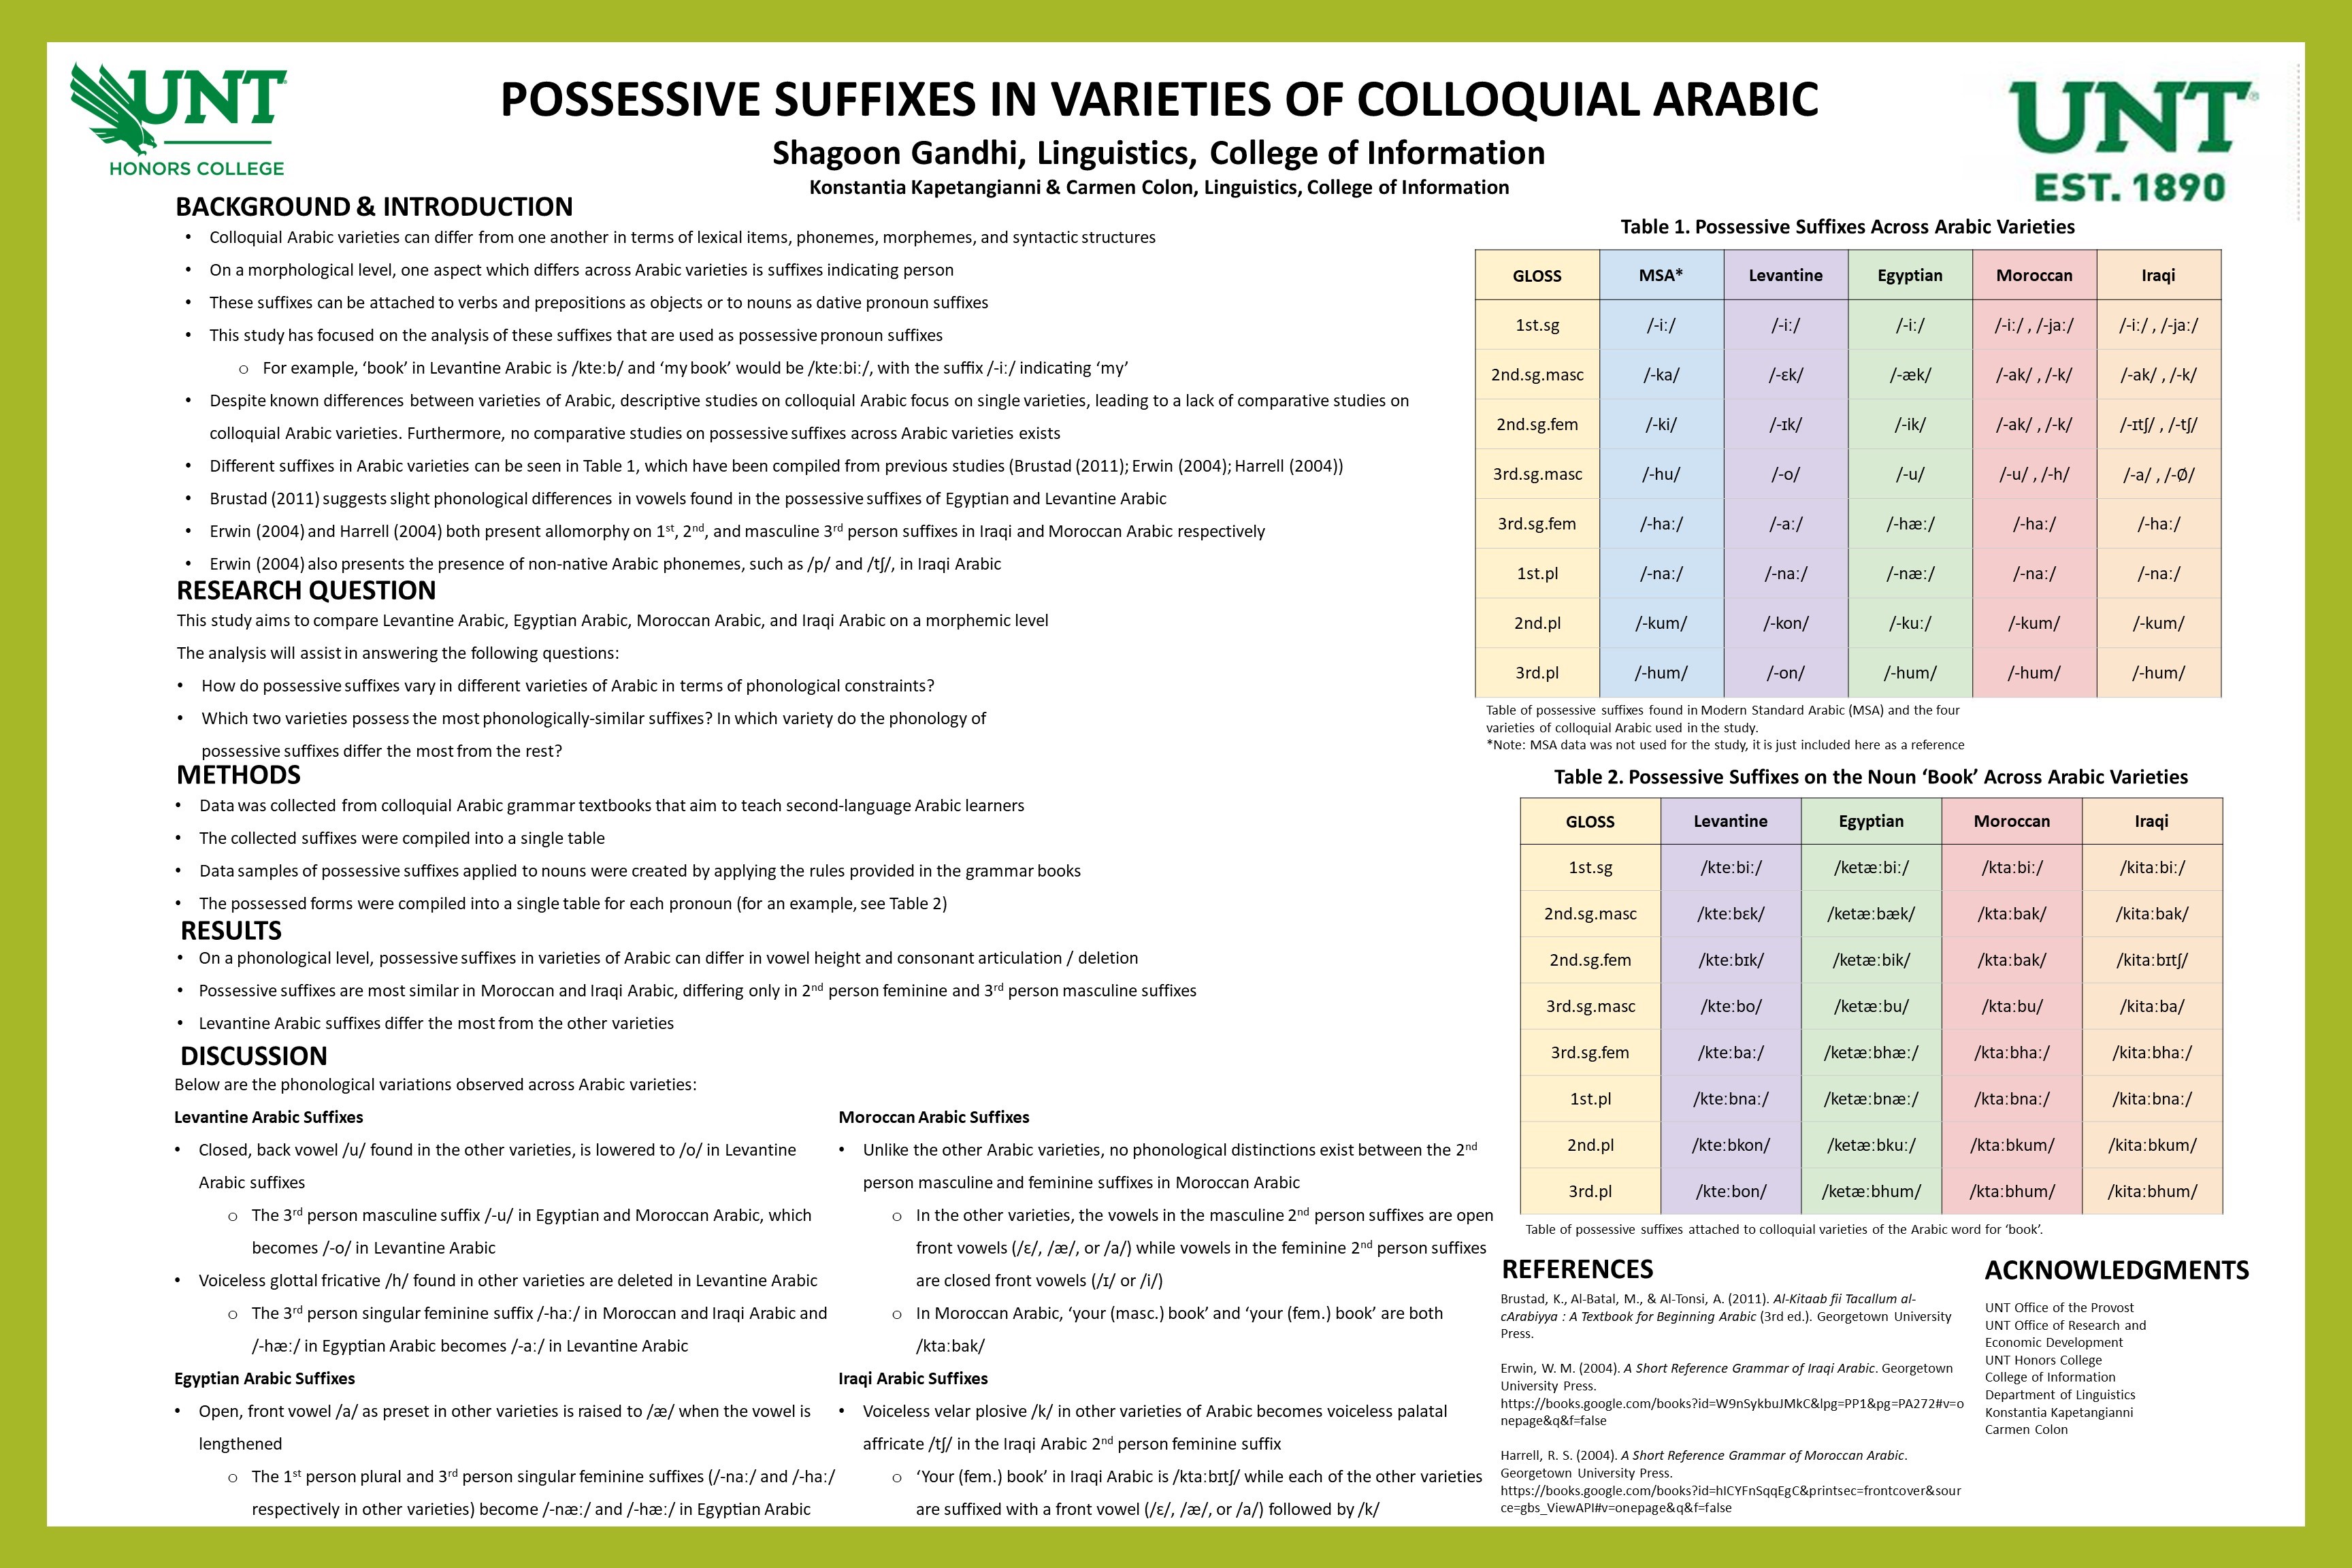 Possessive Suffixes in Varieties of Colloquial Arabic